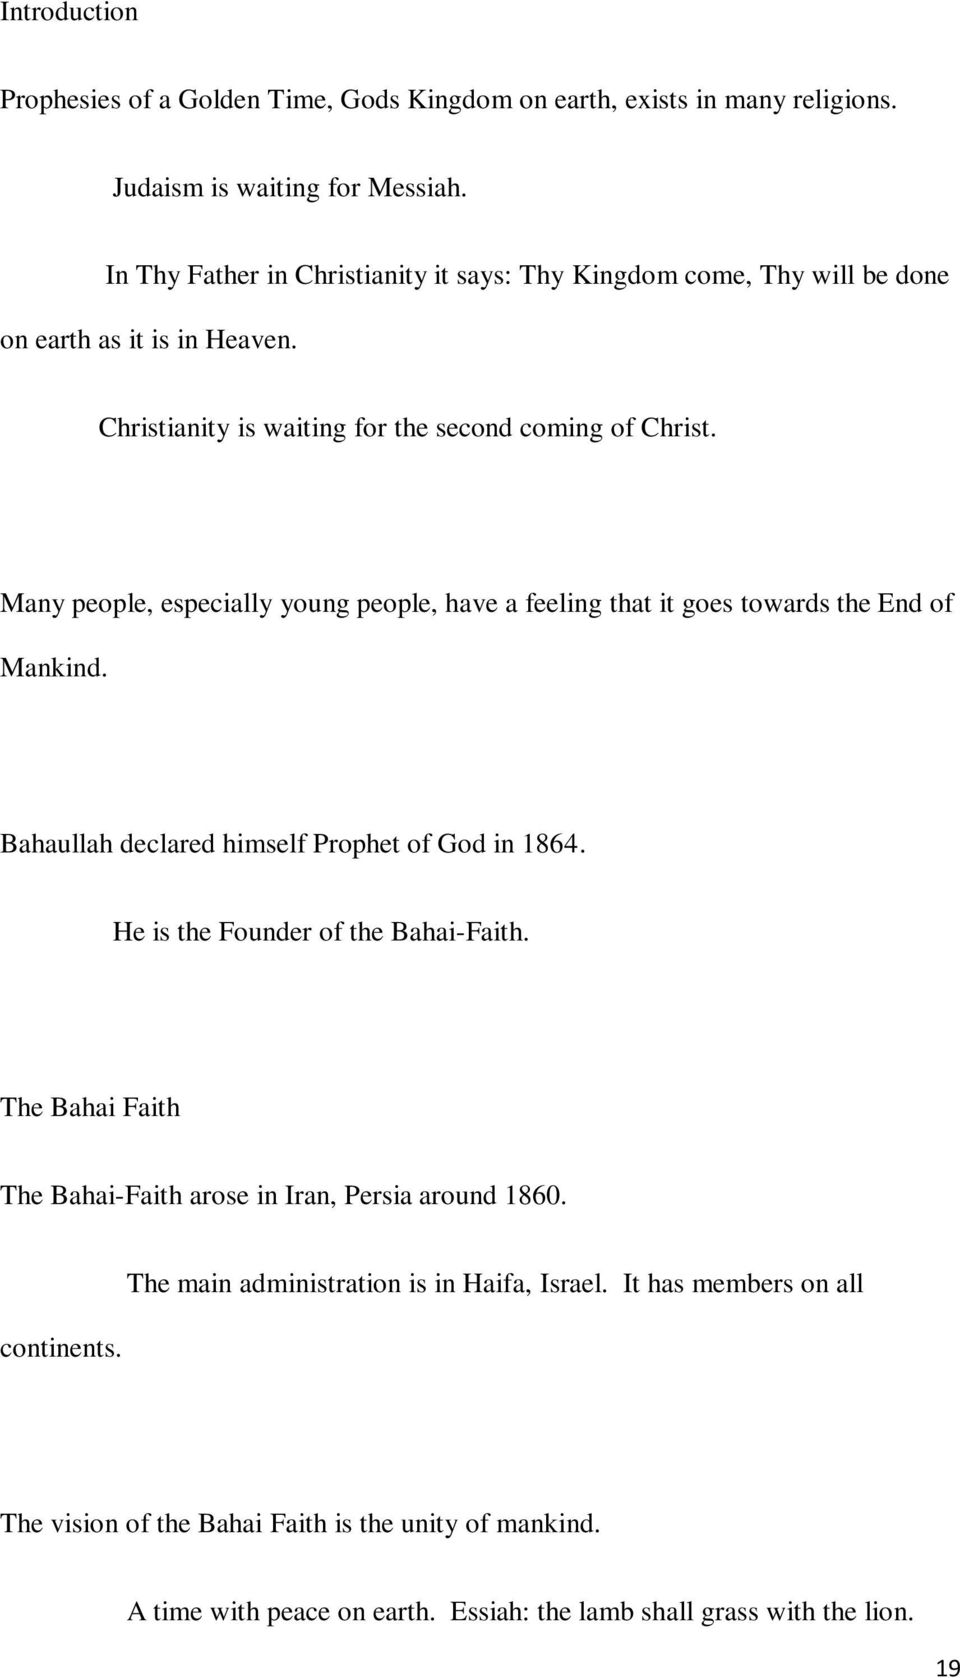 Many people, especially young people, have a feeling that it goes towards the End of Mankind. Bahaullah declared himself Prophet of God in 1864. He is the Founder of the Bahai-Faith.